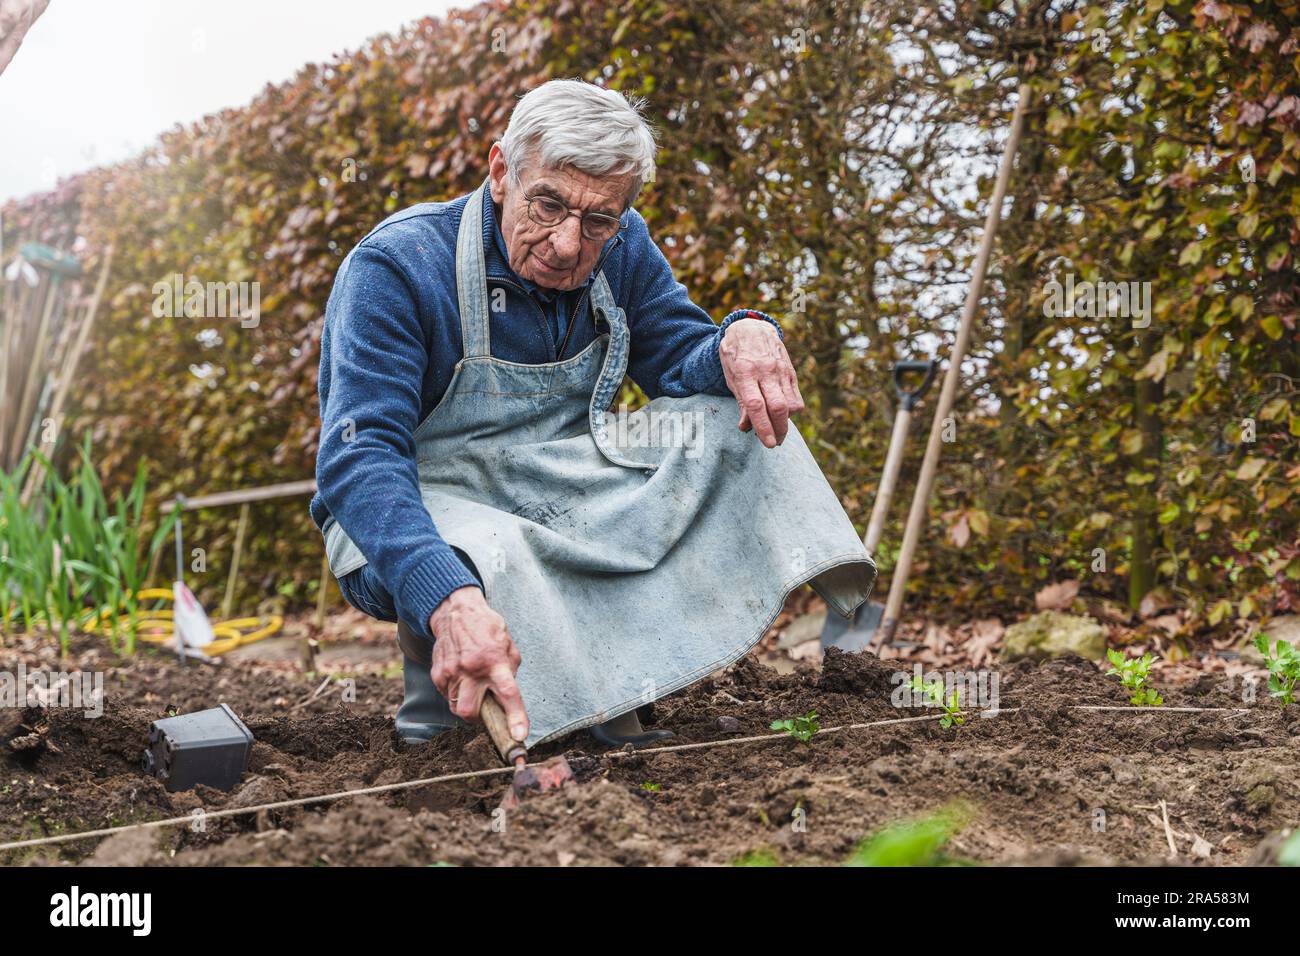 An elderly man in a blue shirt and apron is seen working in a garden, possibly planting or digging. He's focused on his task, with trees, plants and a Stock Photo